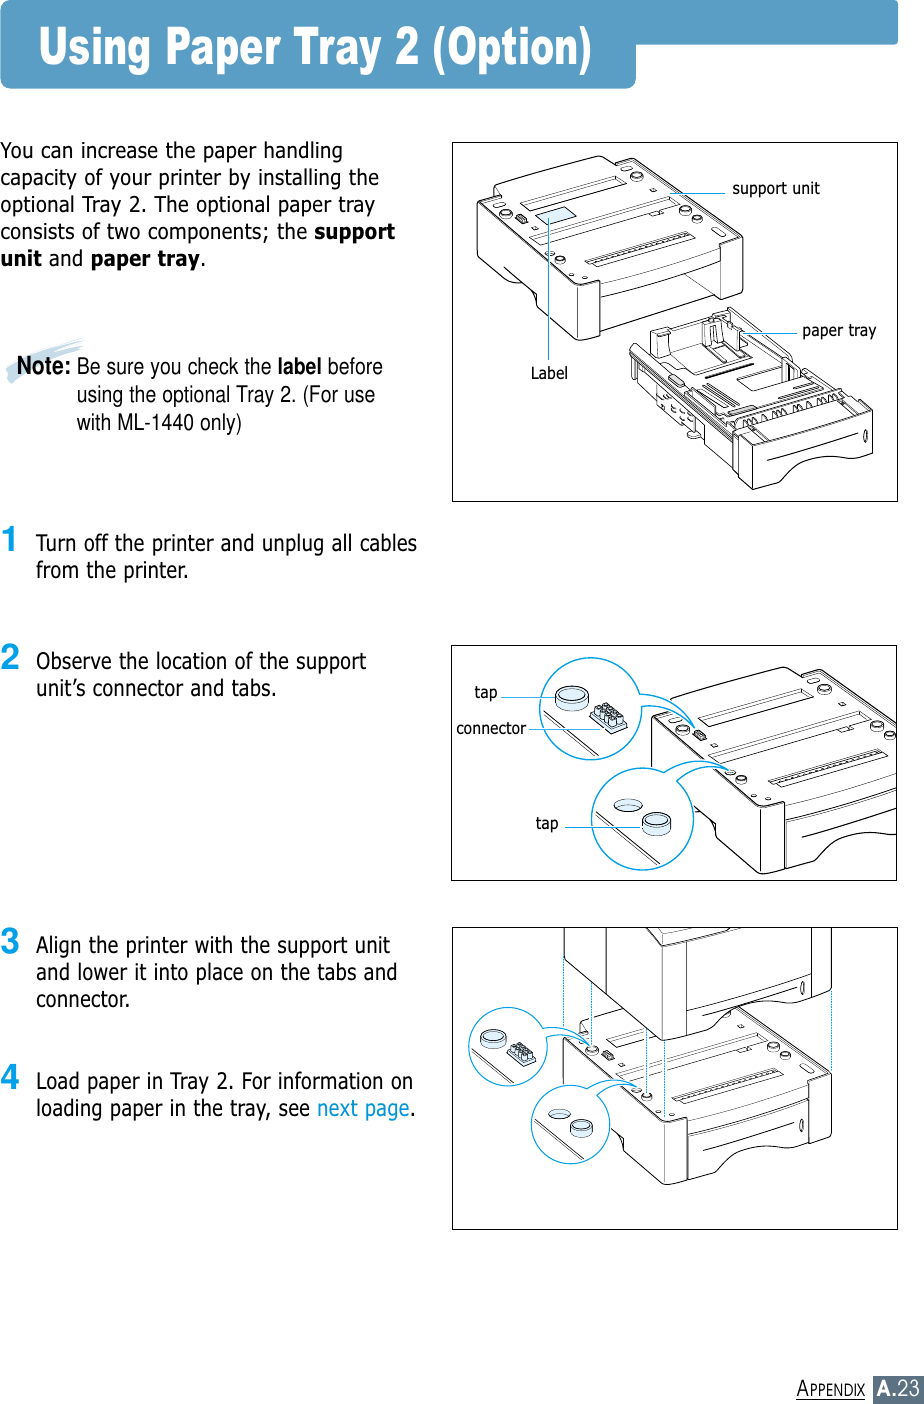 A.23APPENDIXUsing Paper Tray 2 (Option)You can increase the paper handlingcapacity of your printer by installing theoptional Tray 2. The optional paper trayconsists of two components; the supportunit and paper tray.1Turn off the printer and unplug all cablesfrom the printer.2Observe the location of the supportunit’s connector and tabs.3Align the printer with the support unitand lower it into place on the tabs andconnector.4Load paper in Tray 2. For information onloading  paper  in  the  tray,  see next page.support unitpaper traytaptapconnectorNote: Be sure you check the label beforeusing the optional Tray 2. (For usewith ML-1440 only)Label